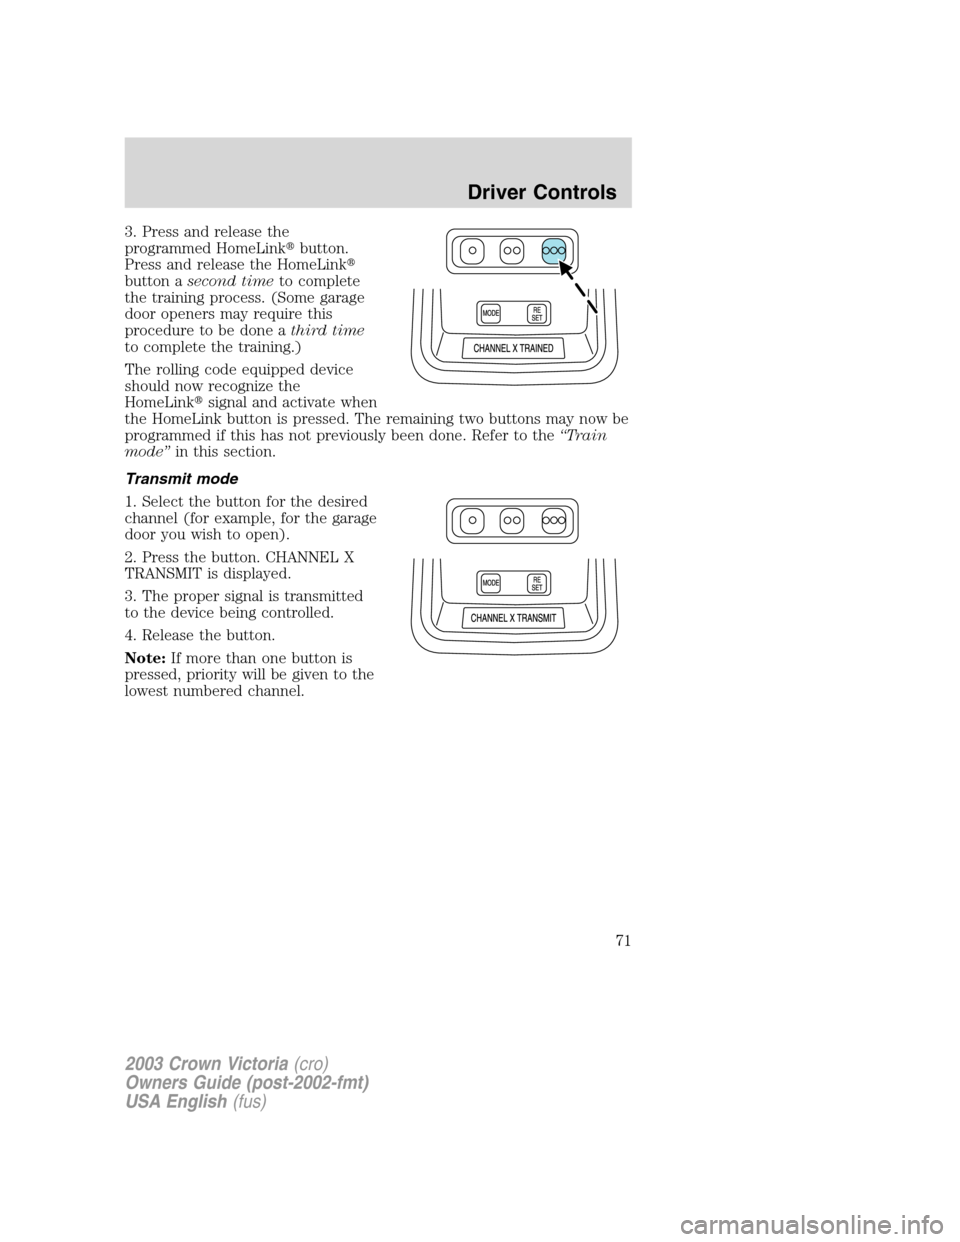 FORD CROWN VICTORIA 2003 2.G Owners Manual 3. Press and release the
programmed HomeLinkbutton.
Press and release the HomeLink
button asecond timeto complete
the training process. (Some garage
door openers may require this
procedure to be don